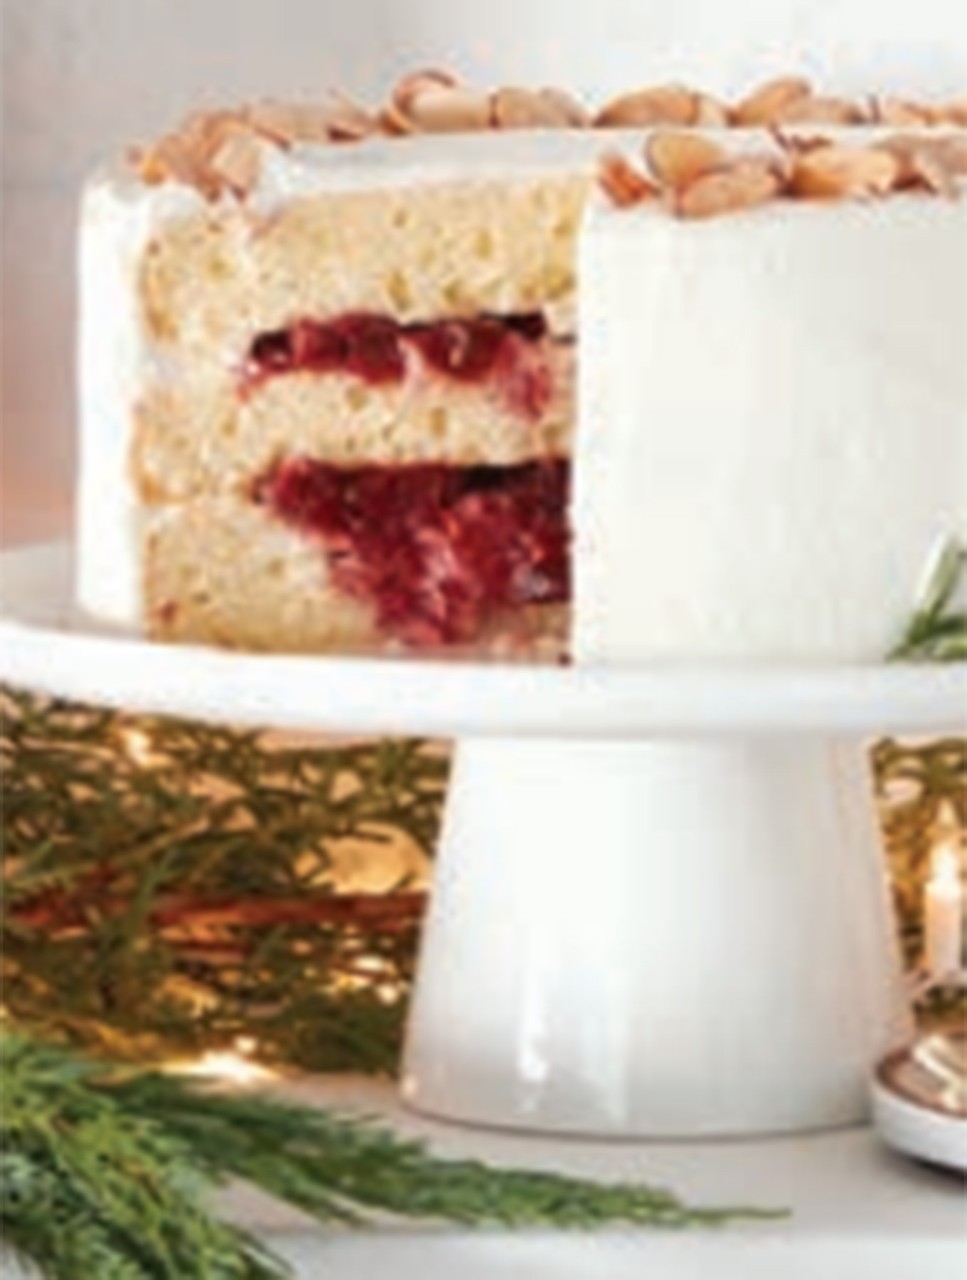 Almond Layer Cake with Sour Cherries